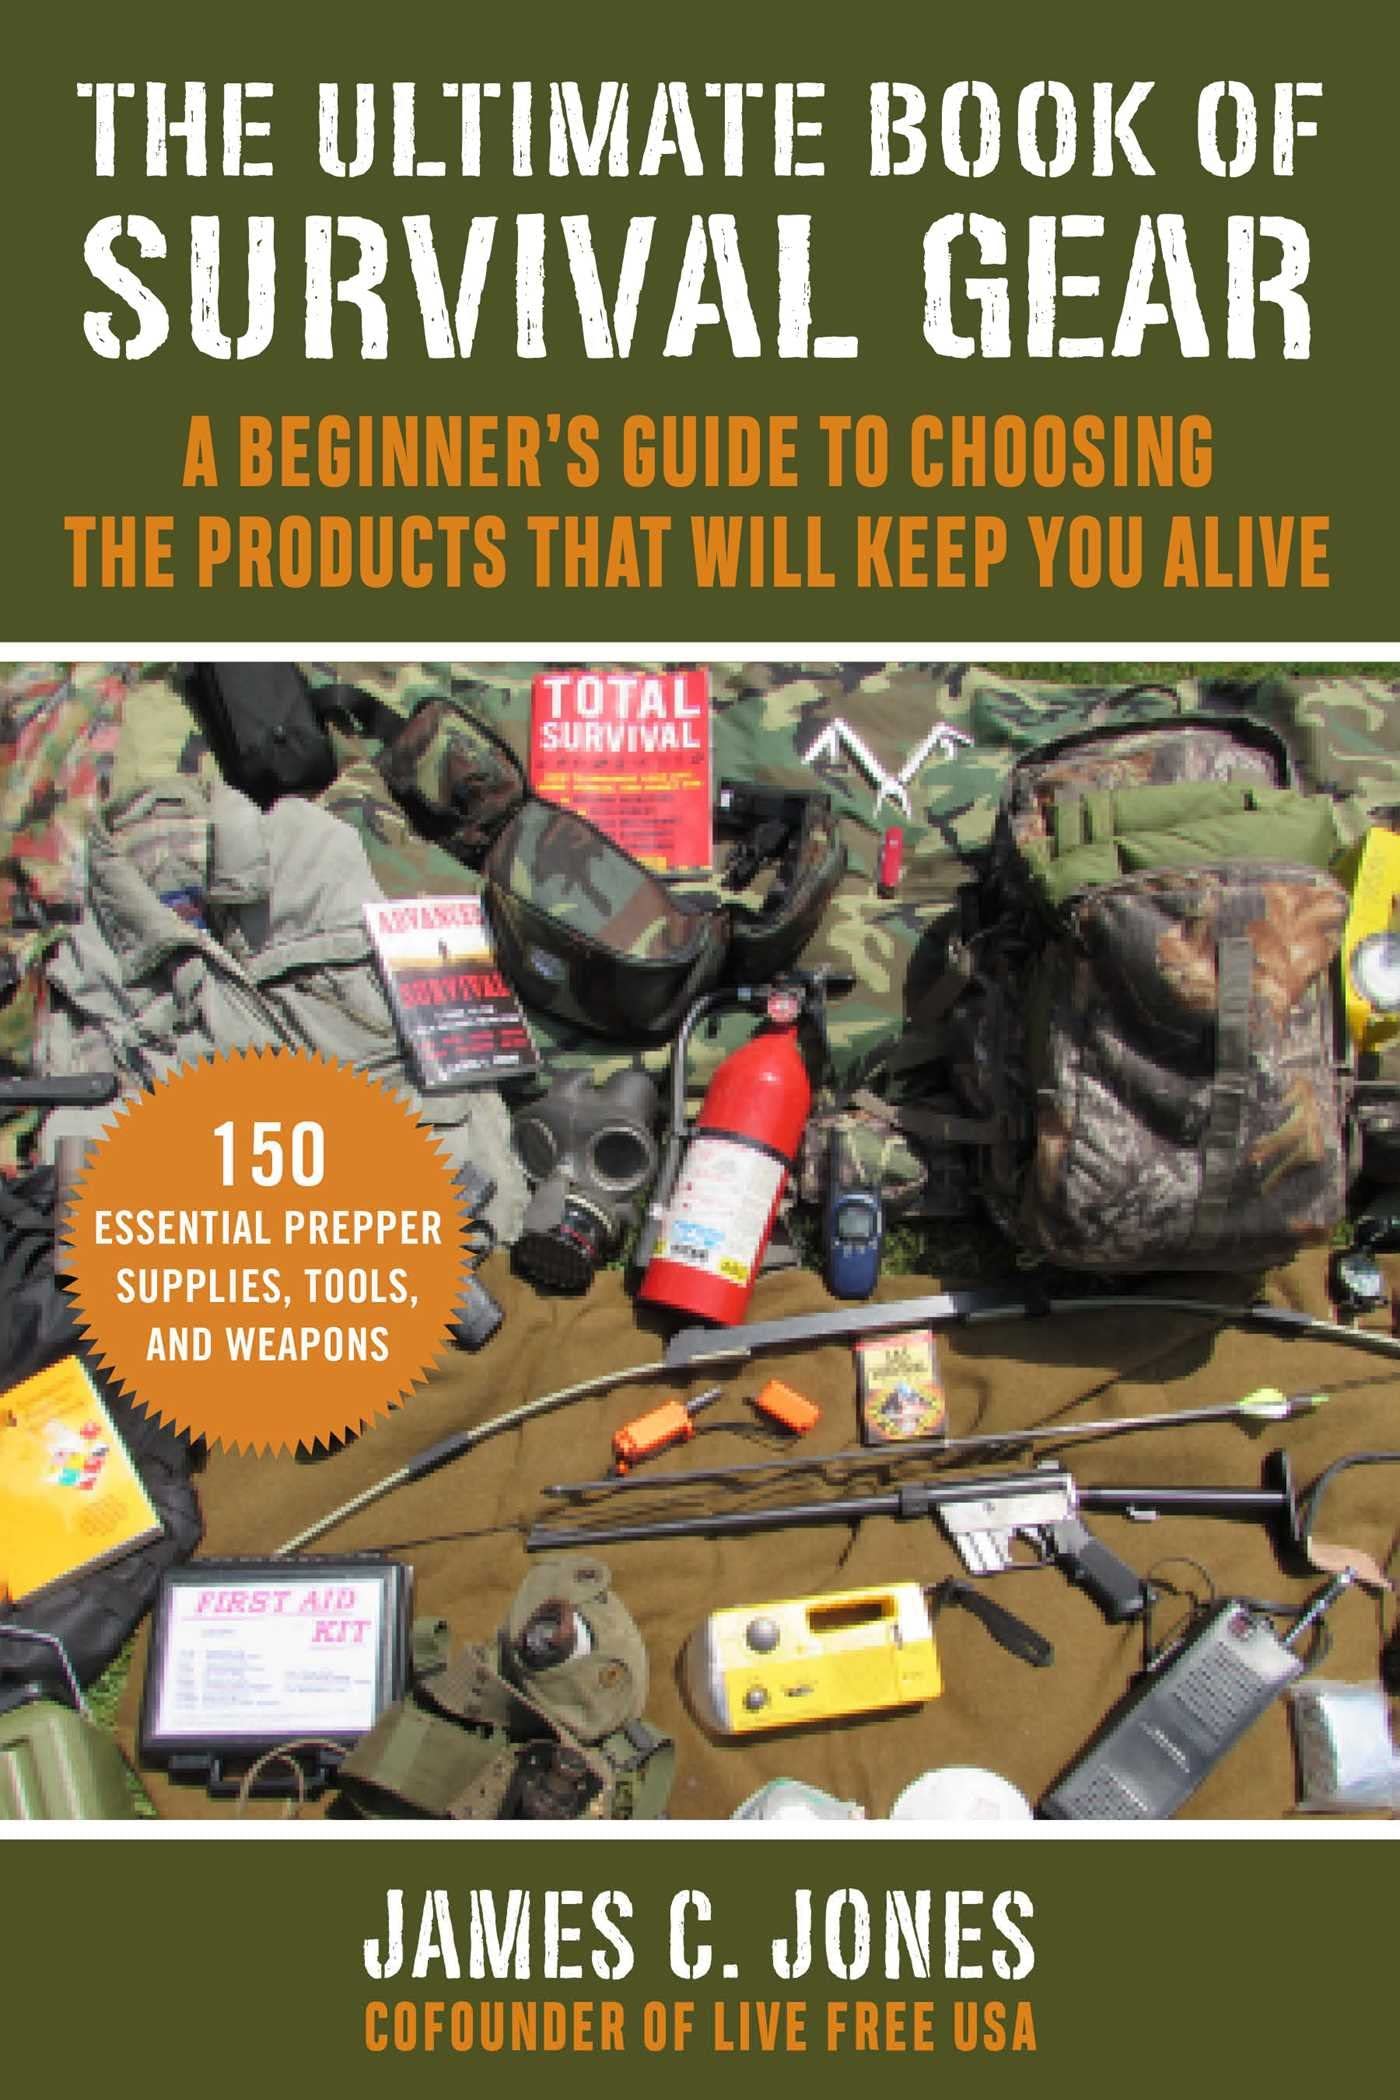 The Ultimate Book of Survival Gear